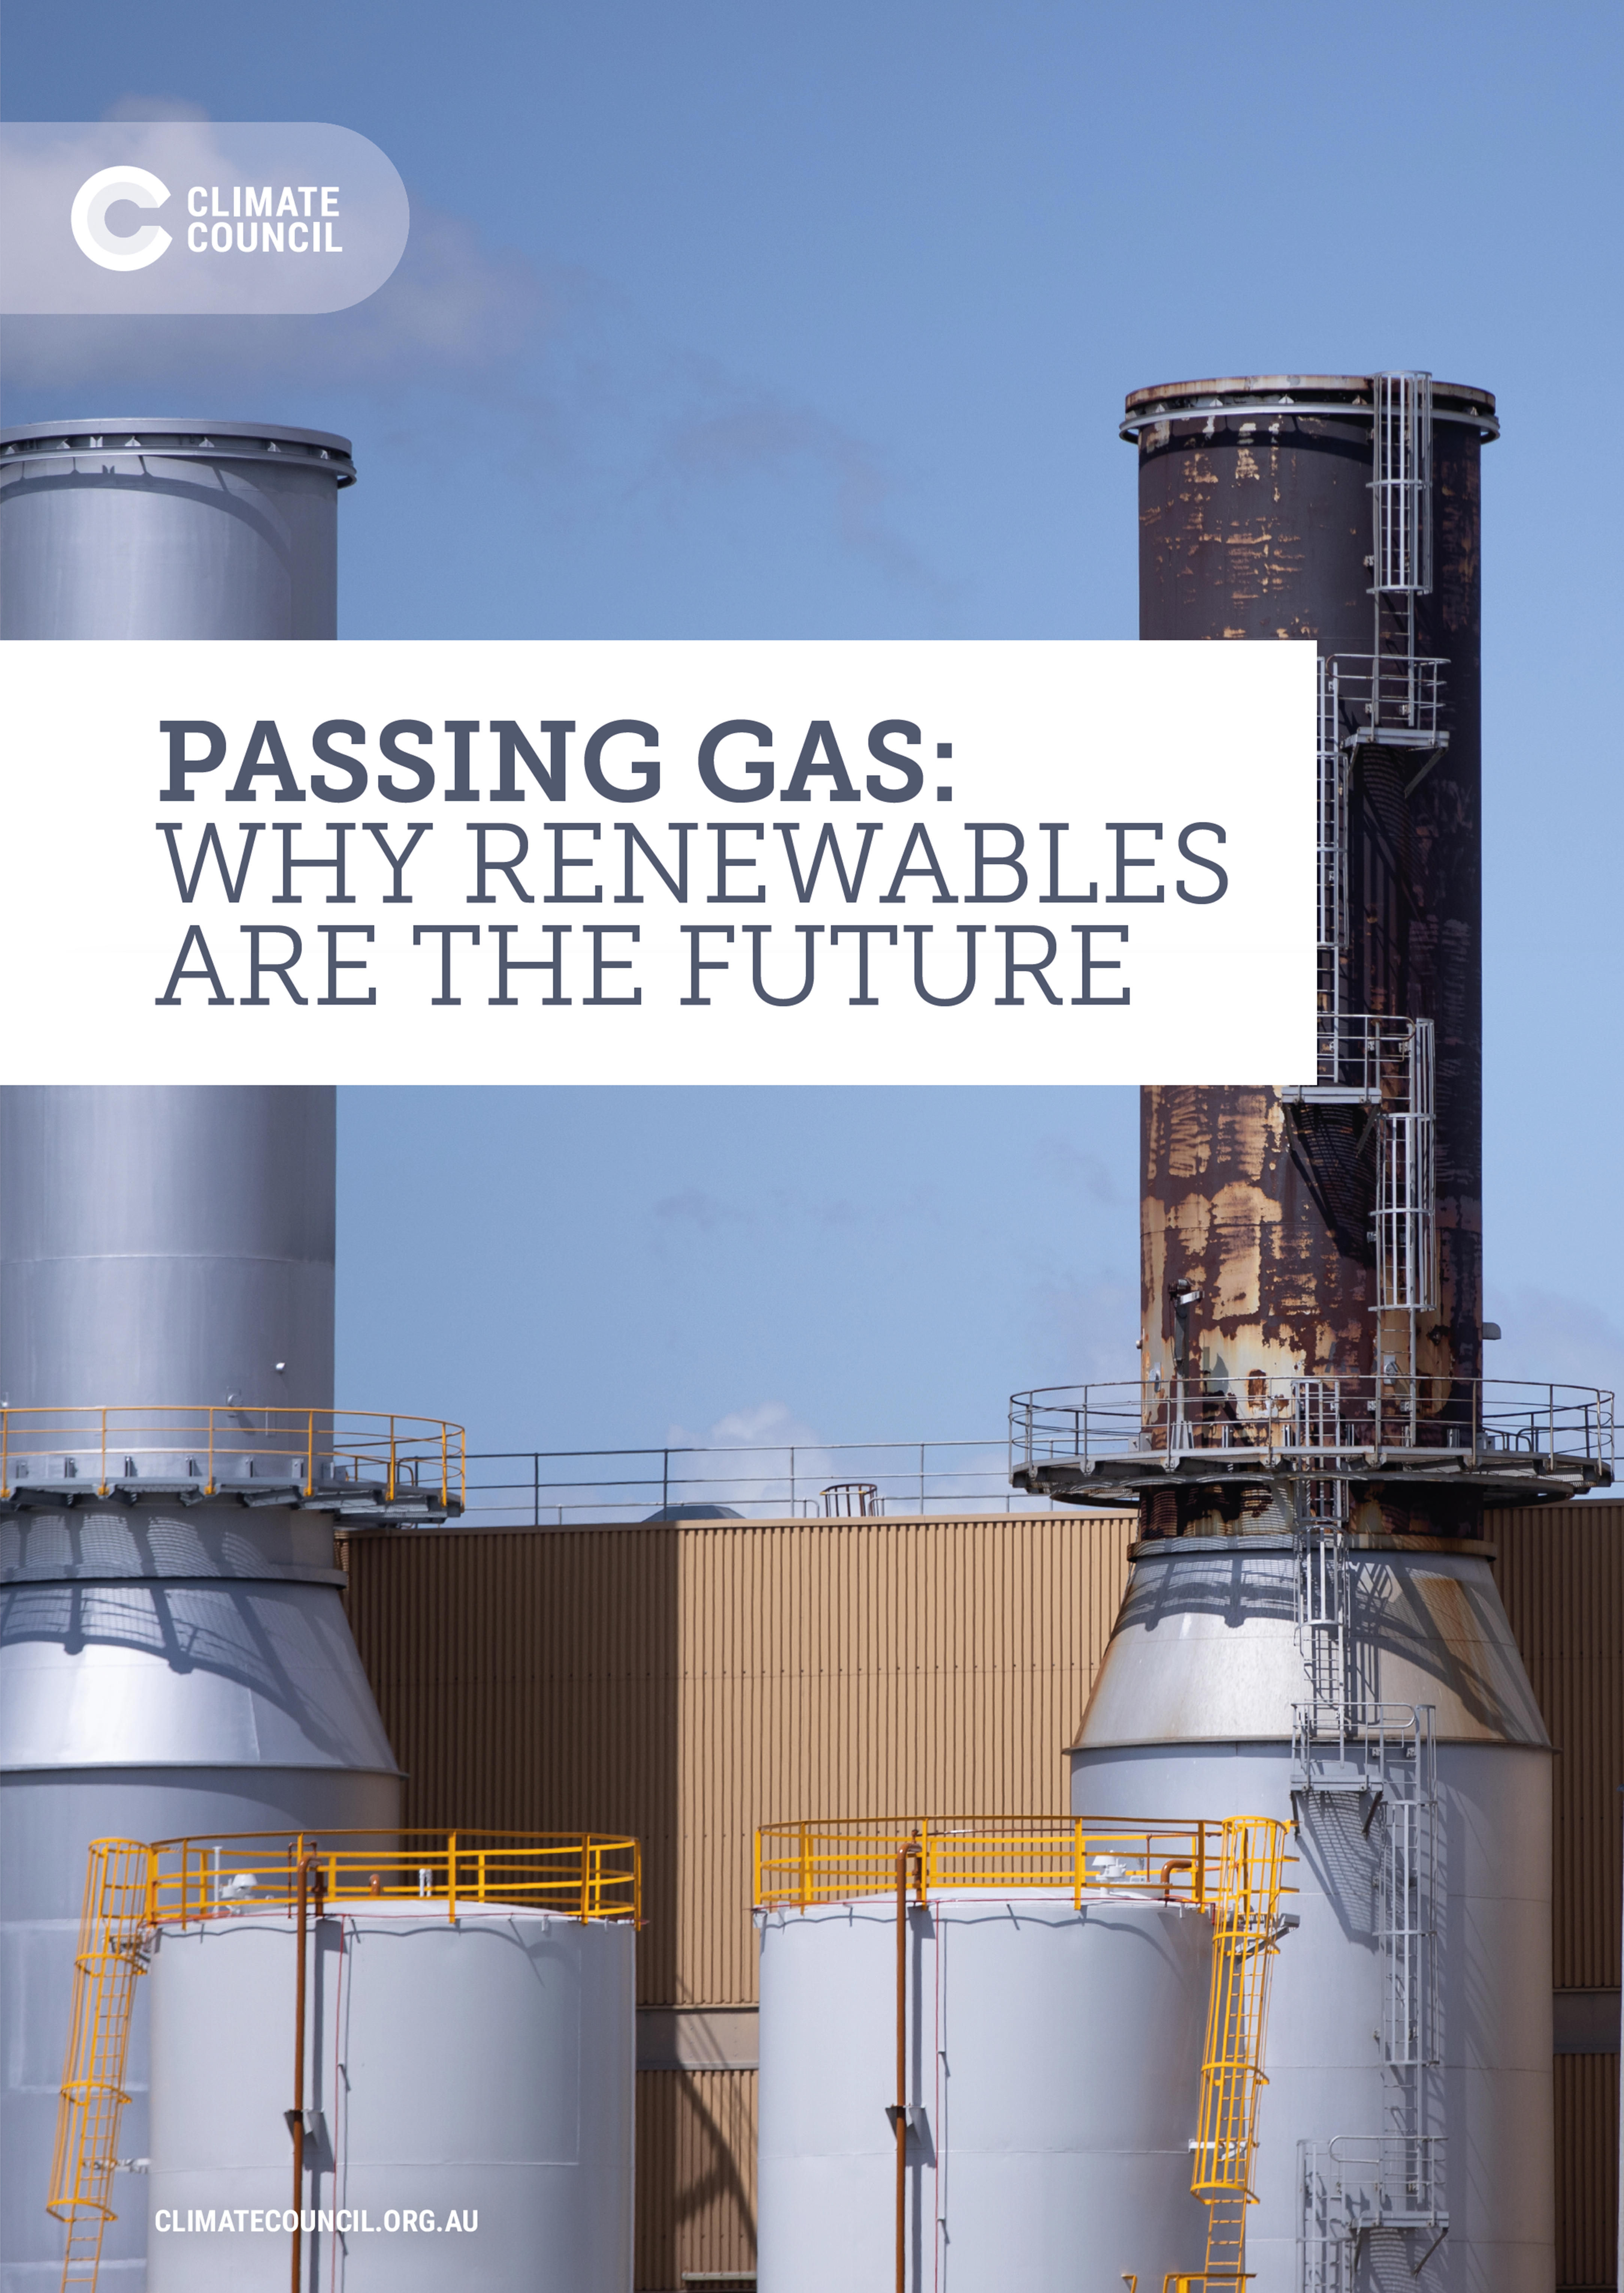 Gas report, 'Passing Gas: Why Renewables are the Future', front cover depicting twin gas towers